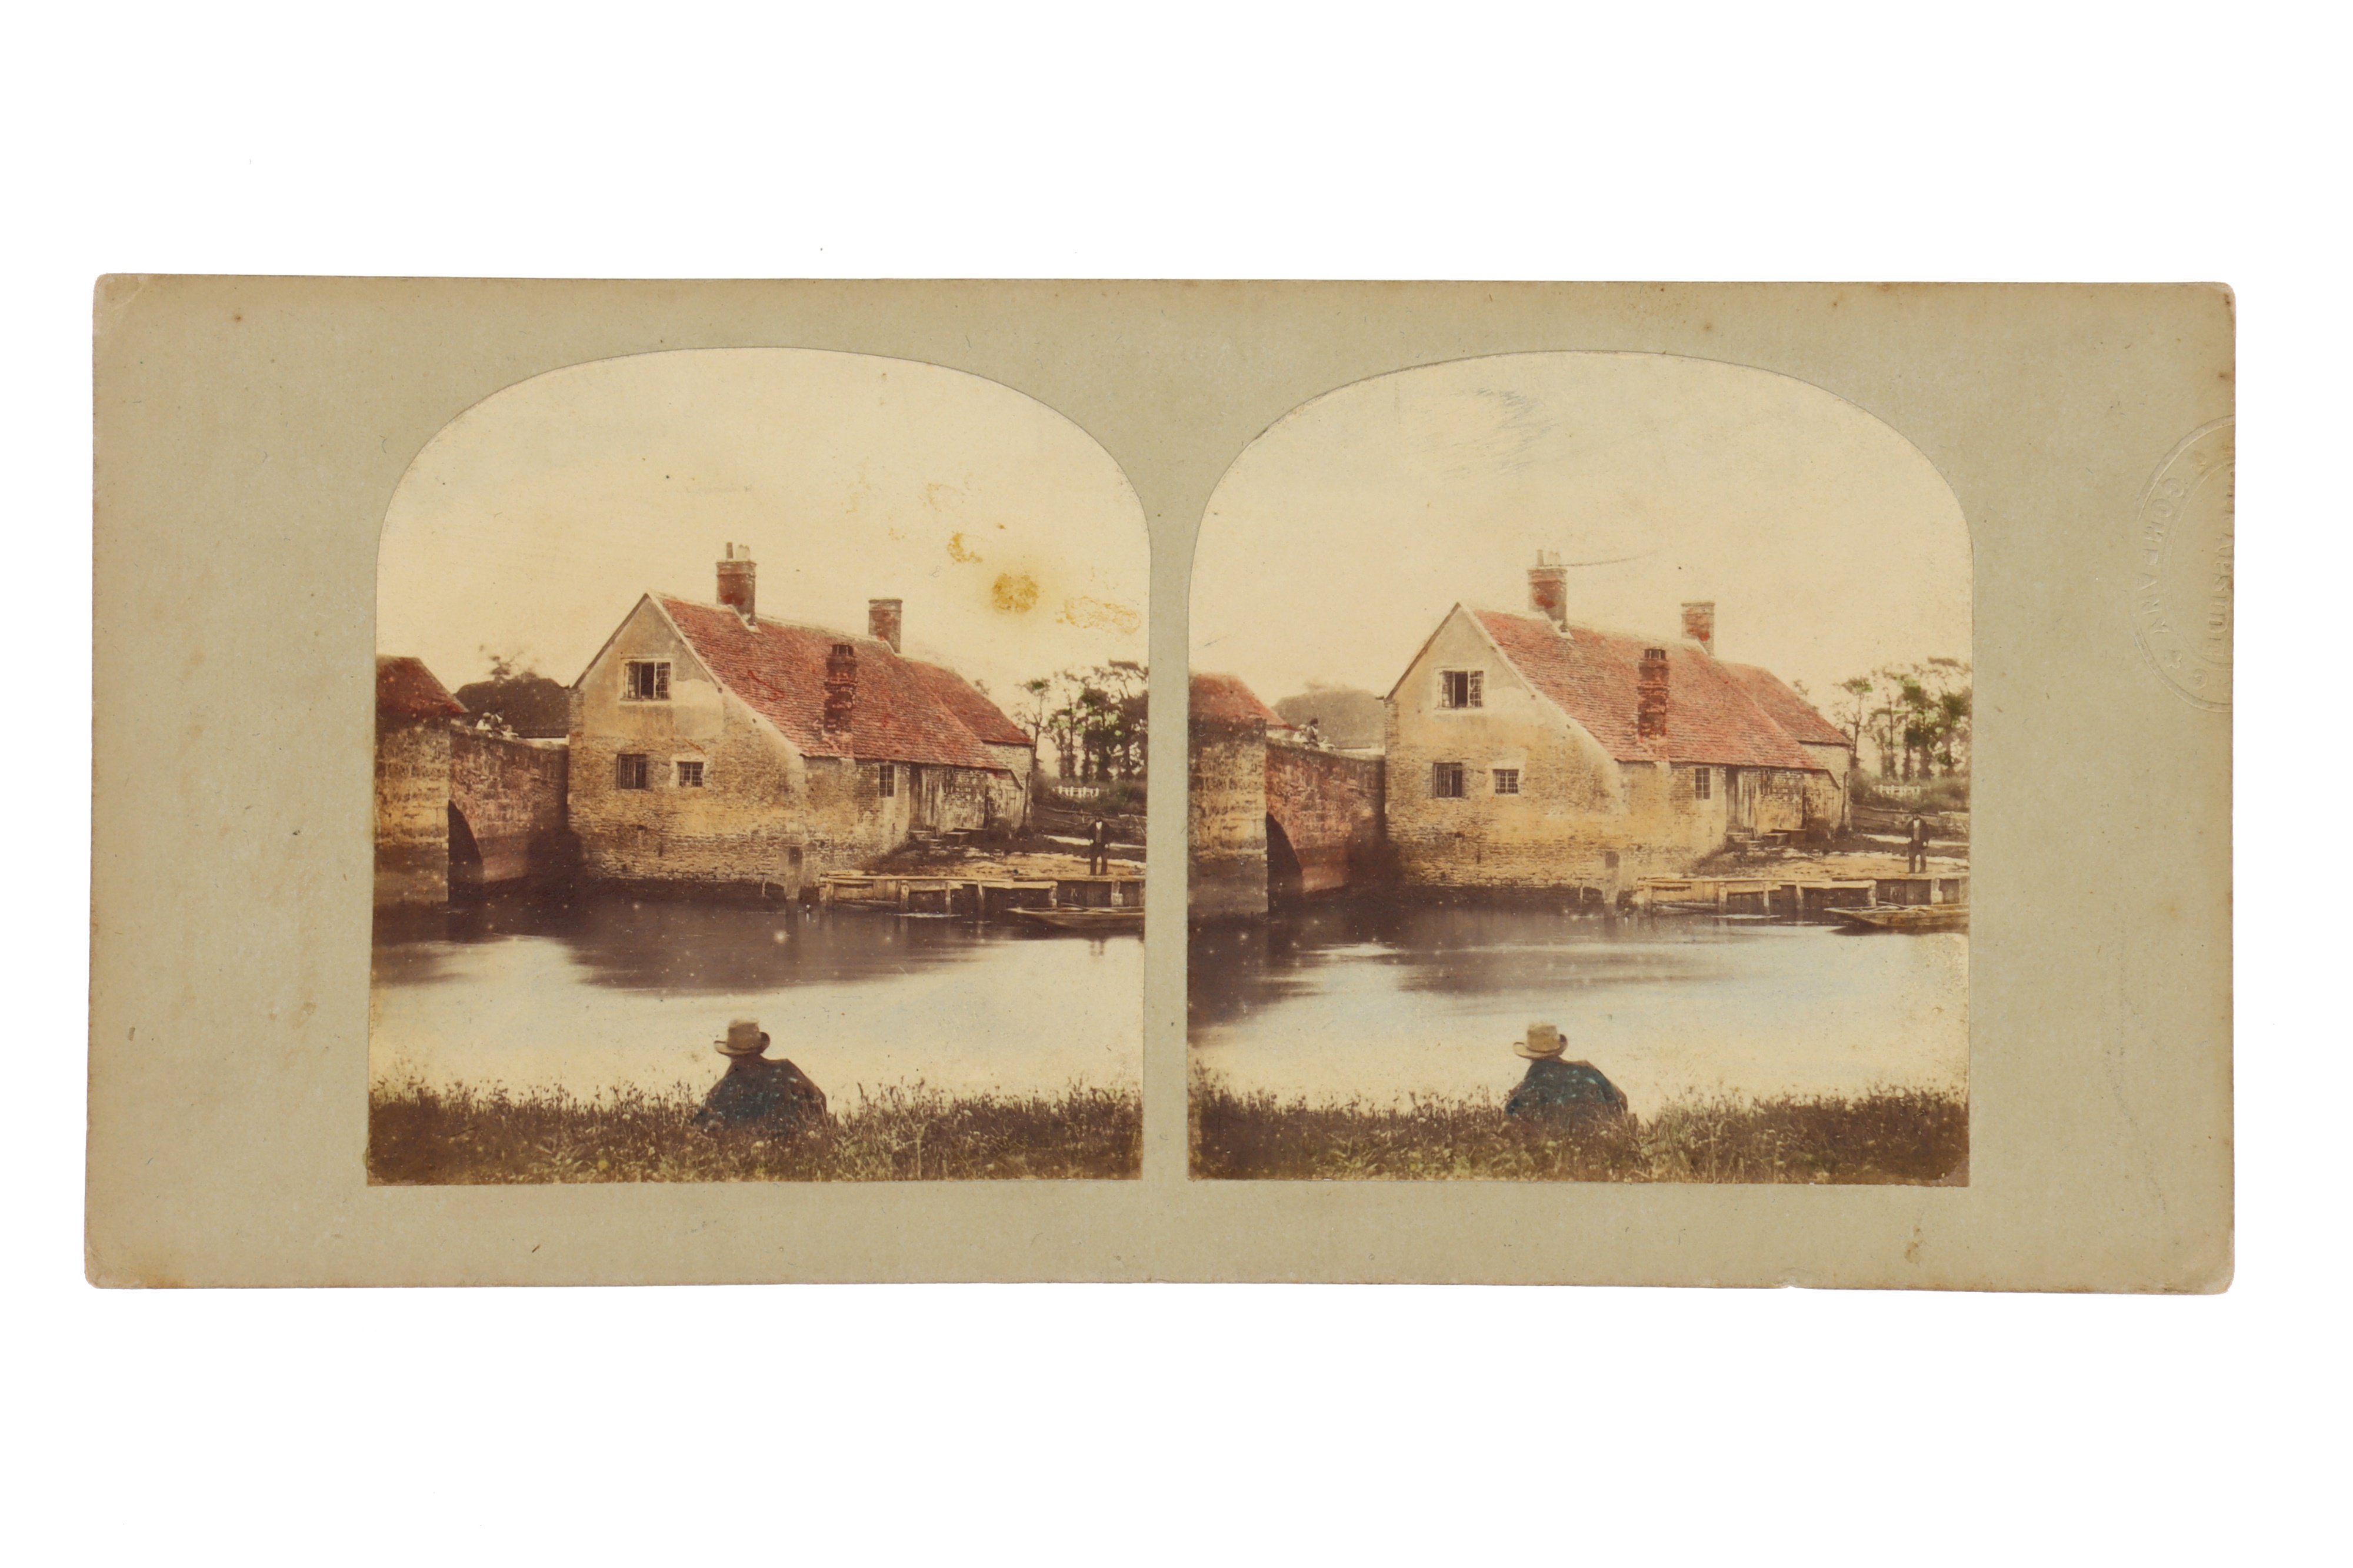 T. R. Williams Stereocard, Scenes in Our Village, A Cottage on the Banks of the River,